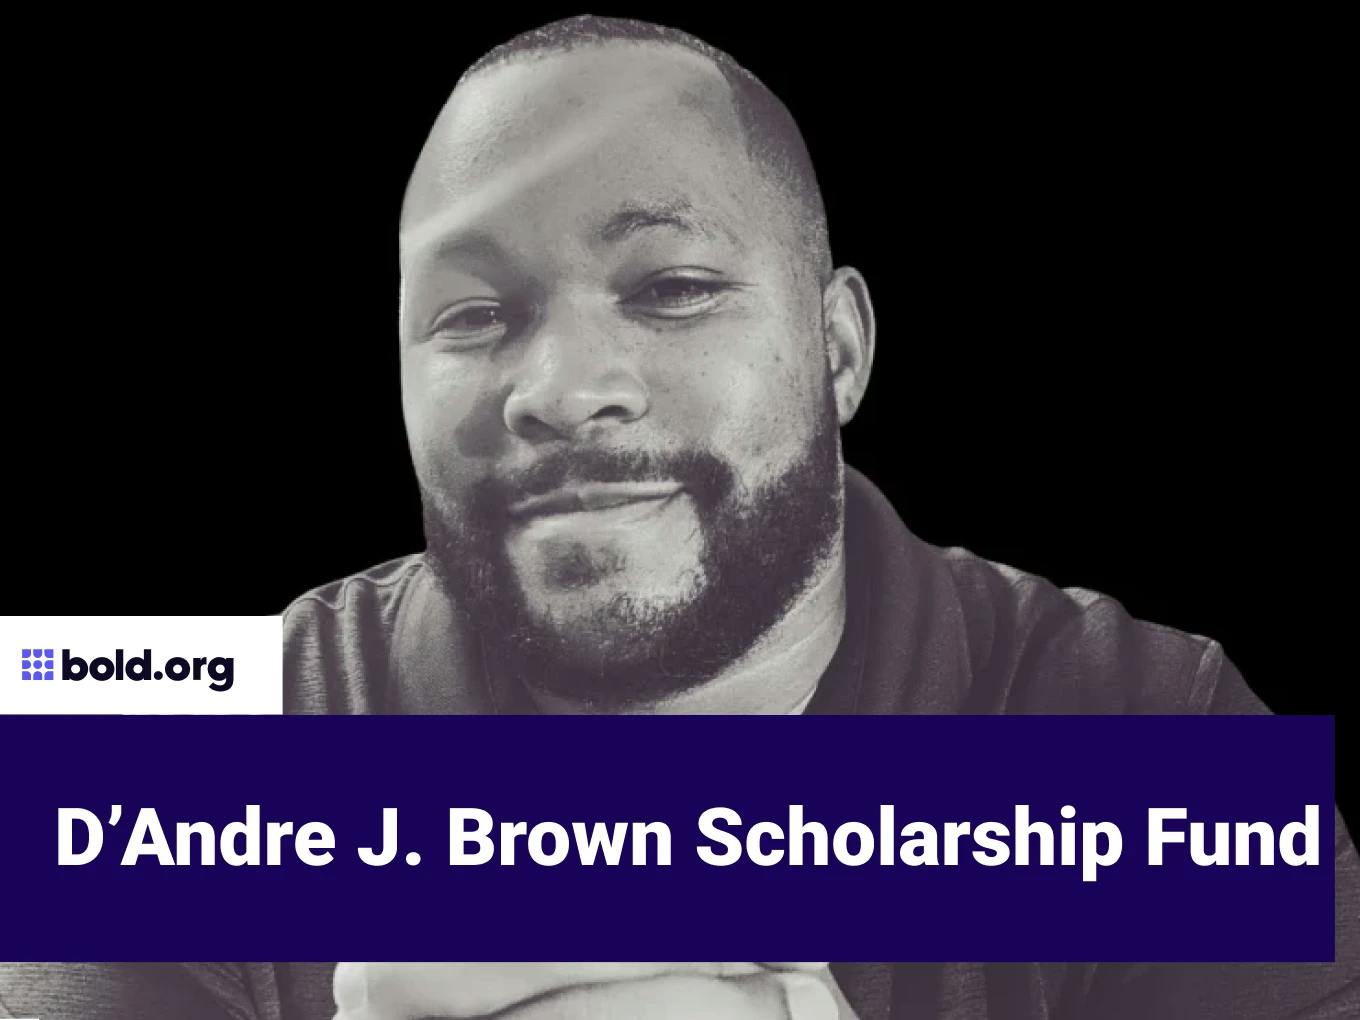 D’Andre J. Brown Scholarship Fund